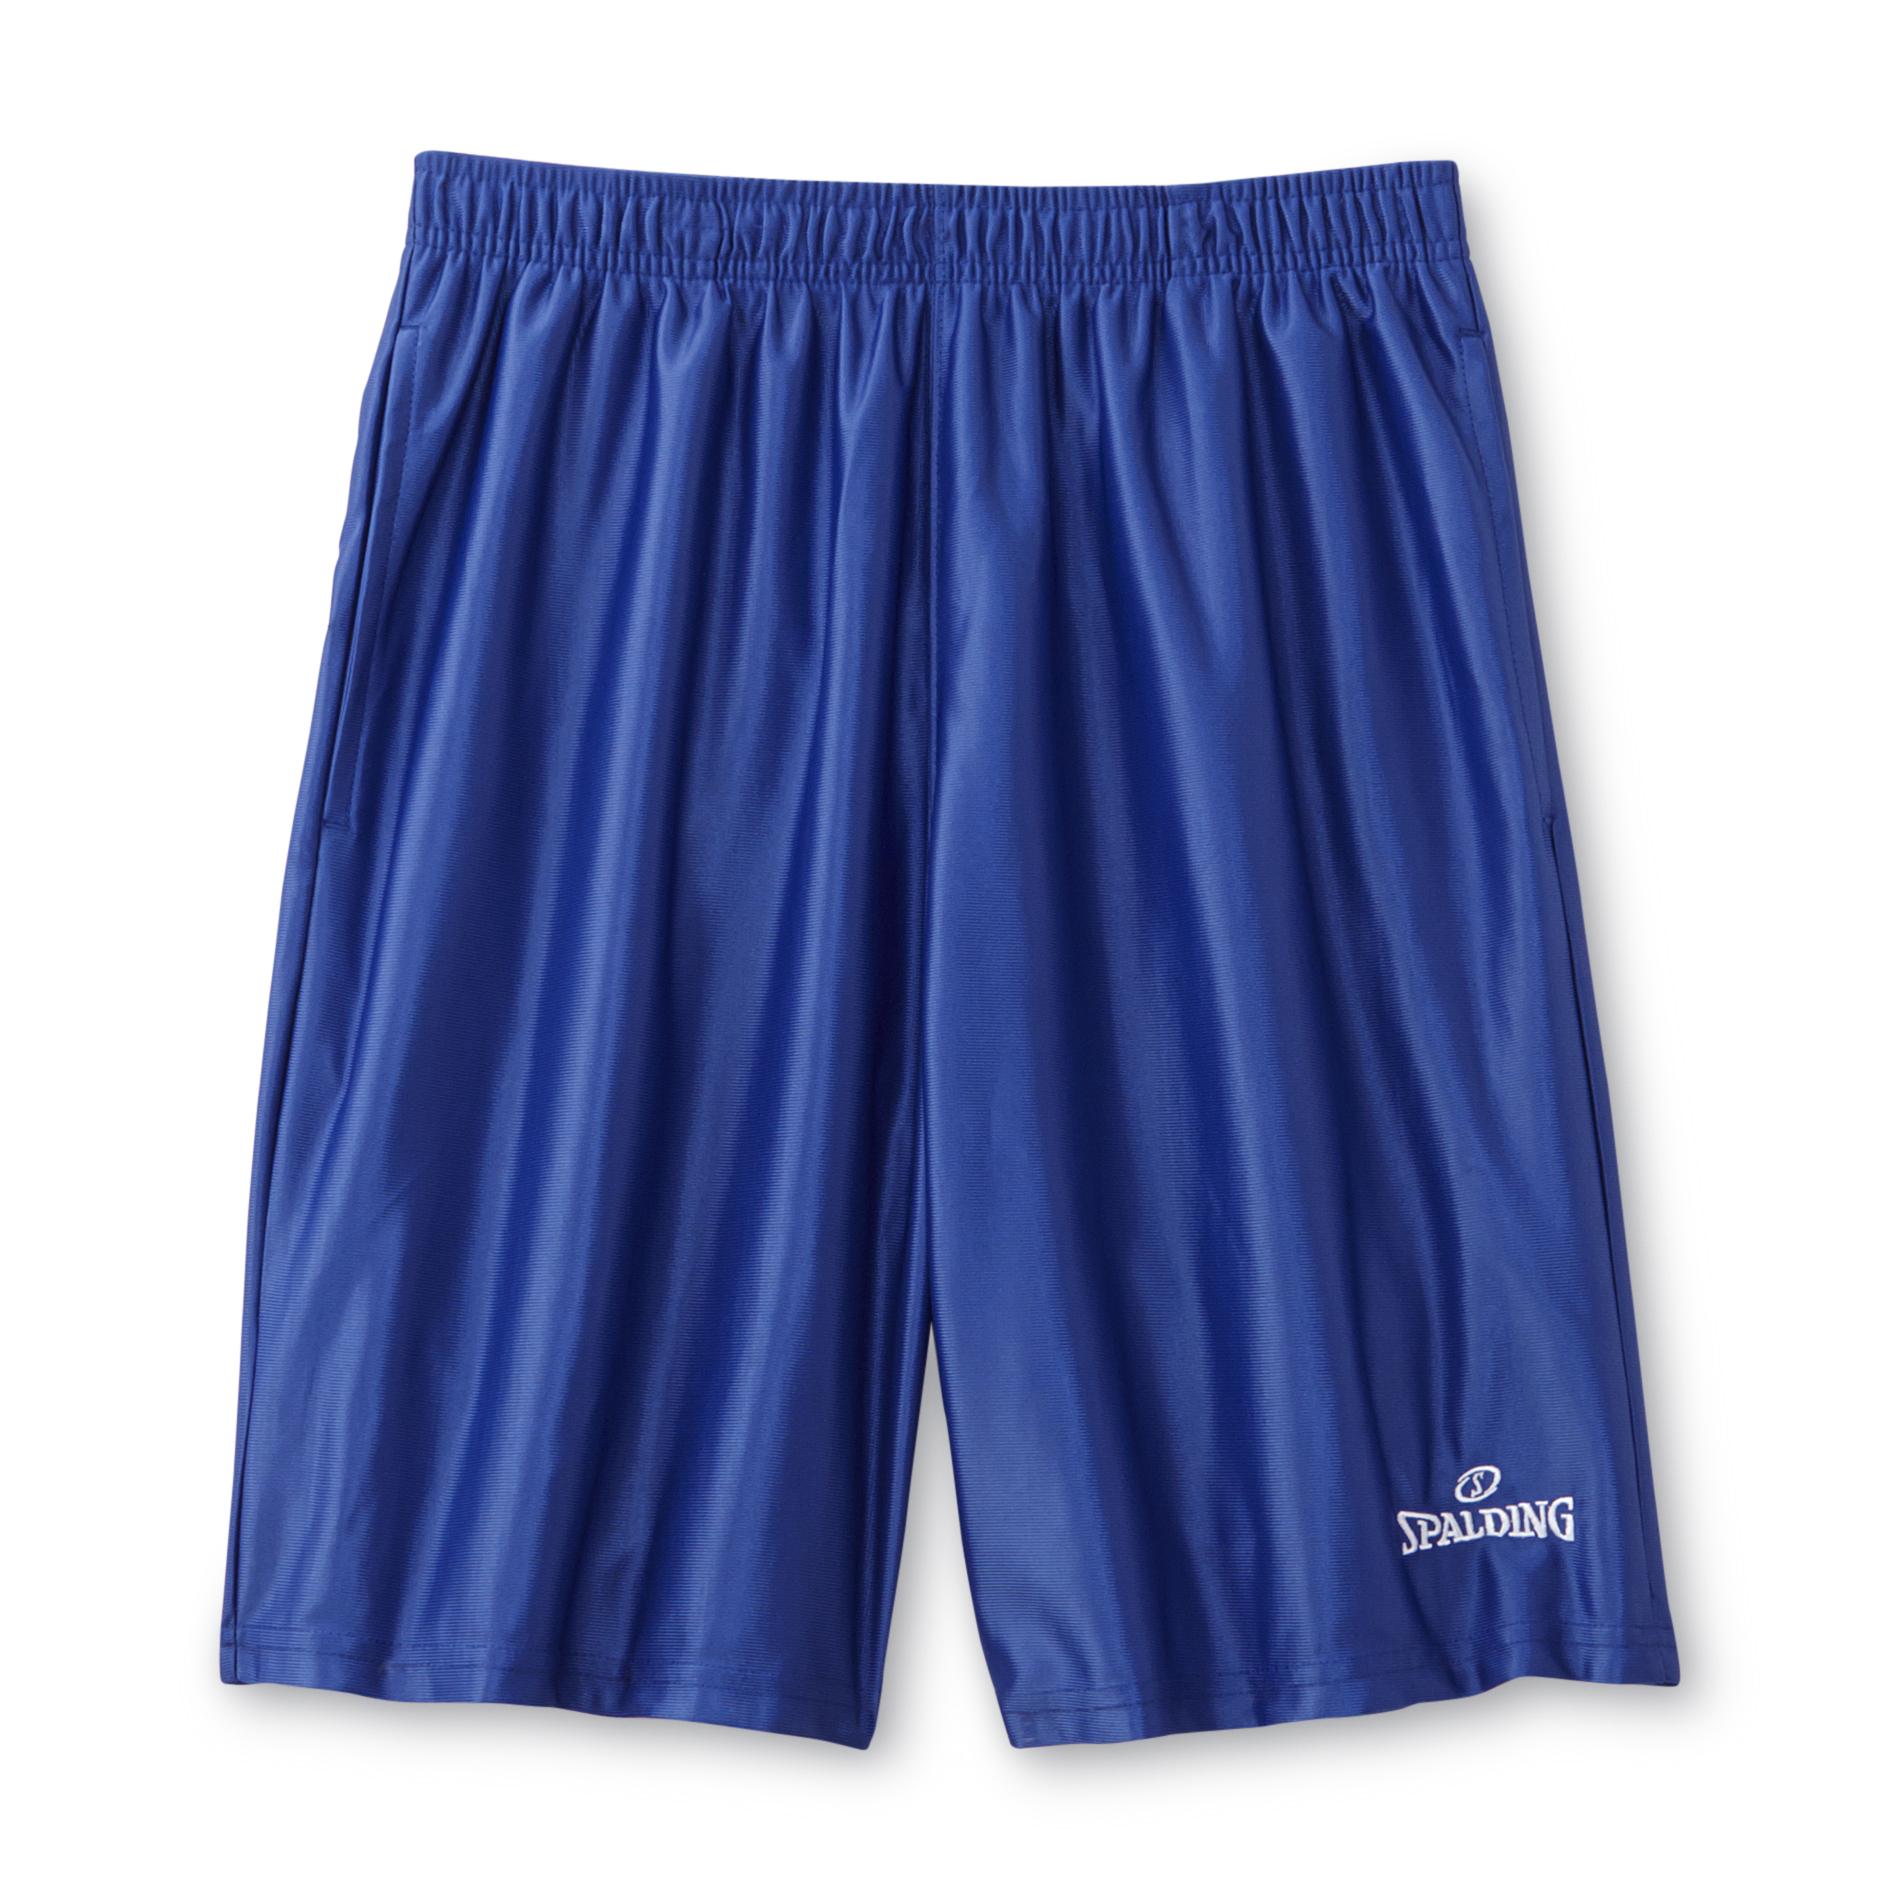 UPC 888282045311 product image for Young Men's Basketball Shorts | upcitemdb.com